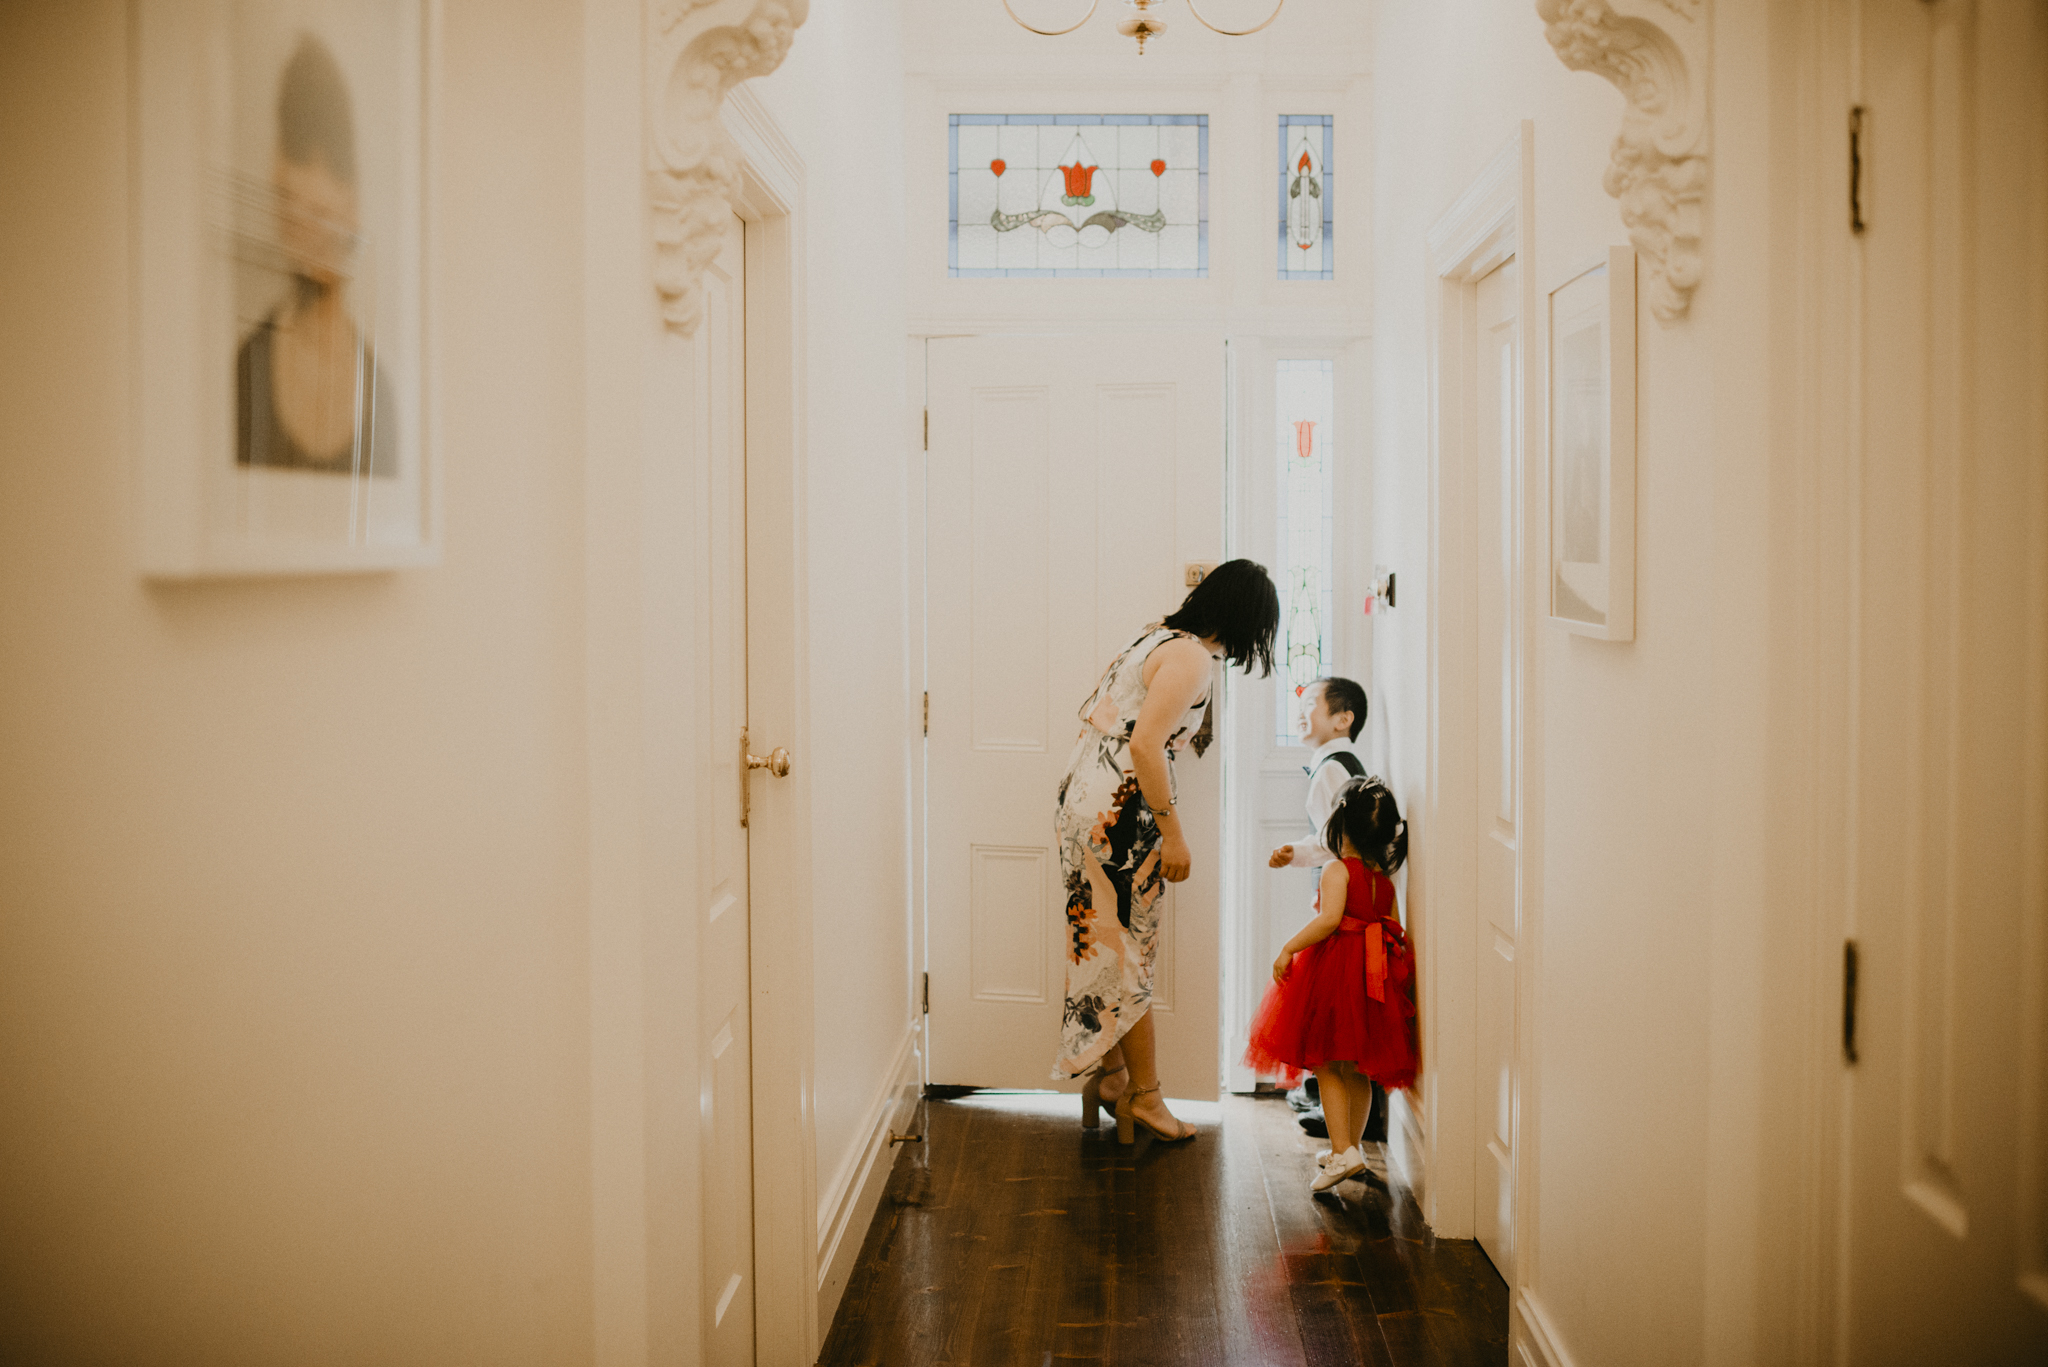 agnes-duy-15th-december-2018-chinese-vietnamese-wedding-tea-ceremony-yarraville-home-house-documentary-candid-photographer-sarah-matler-photography-11